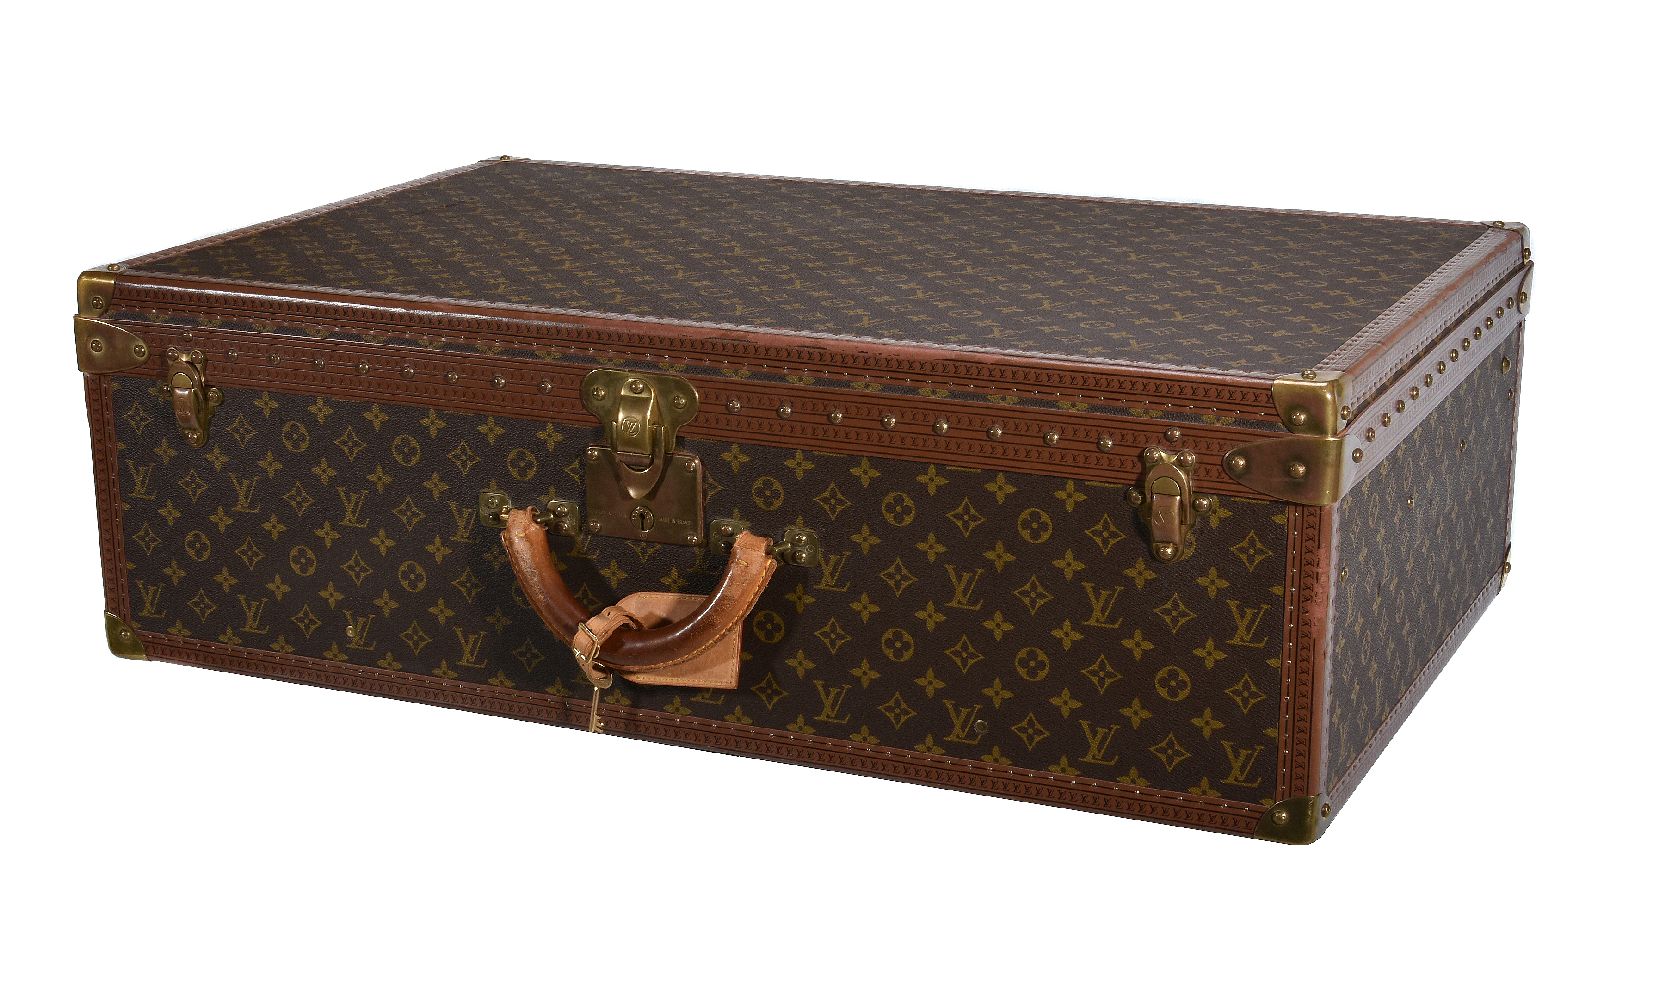 Louis Vuitton, Monogram, a coated canvas and leather hard suitcase